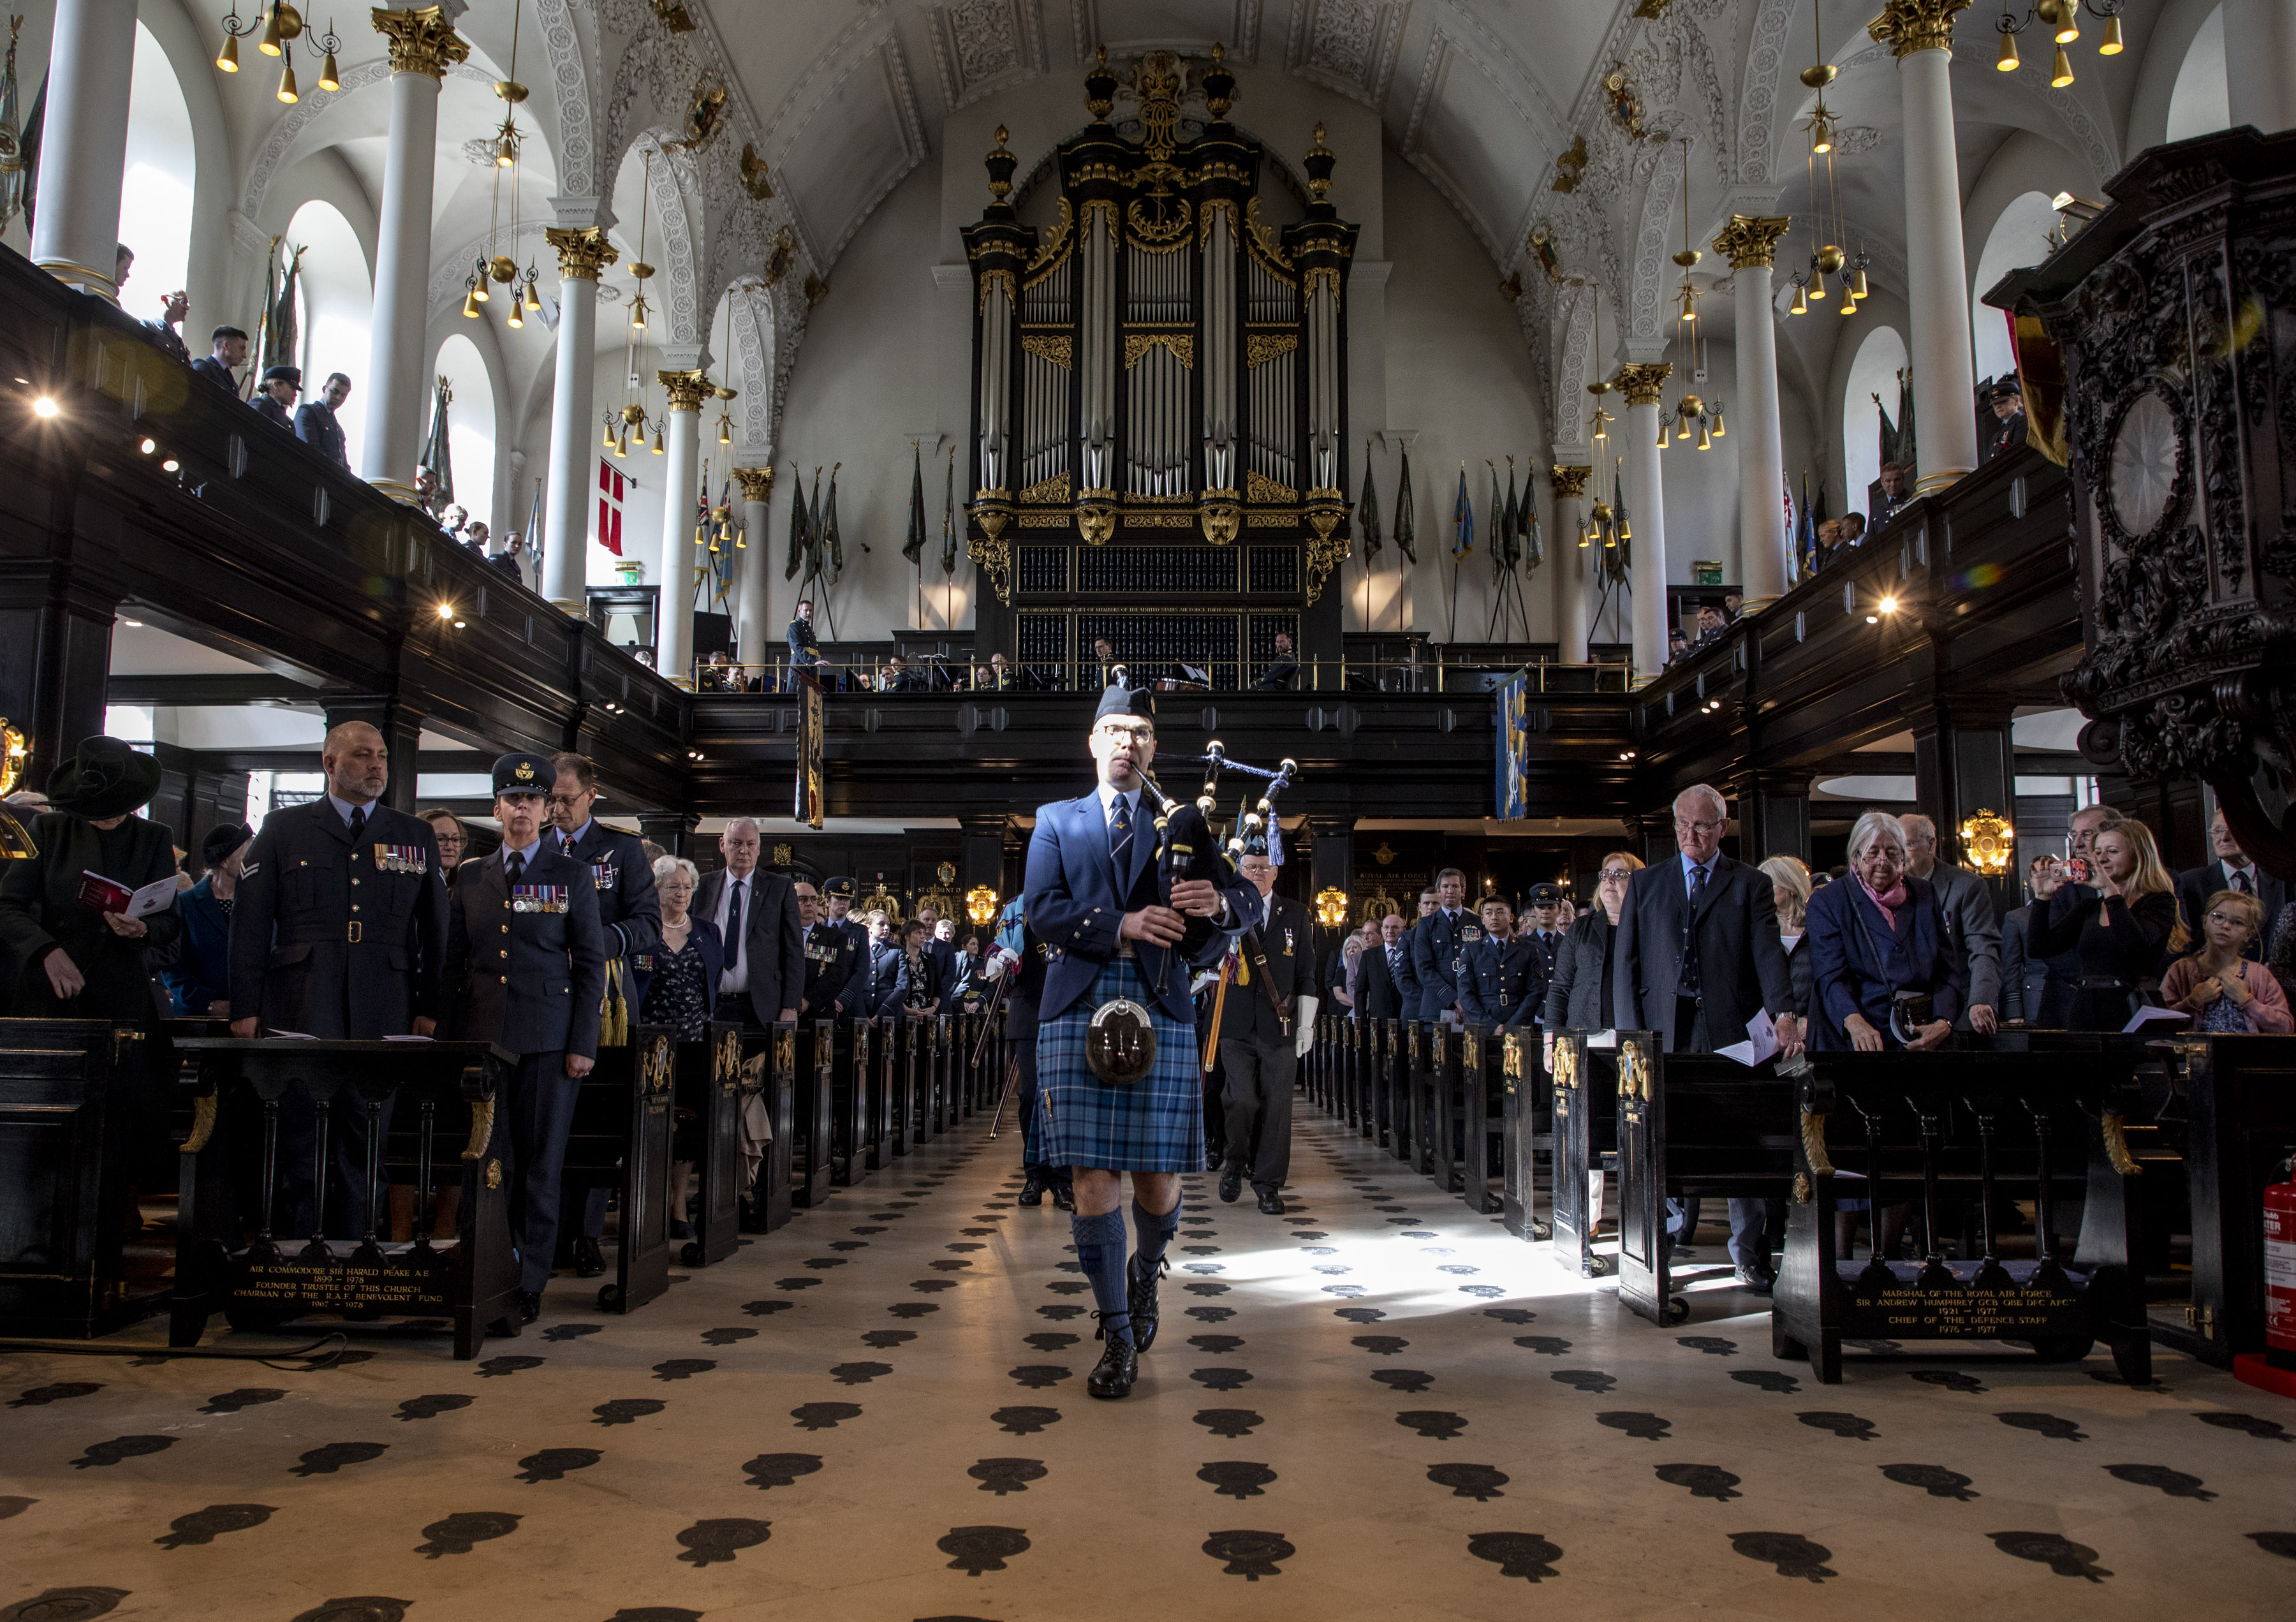 Personnel inside the church perform the service with bagpipes.